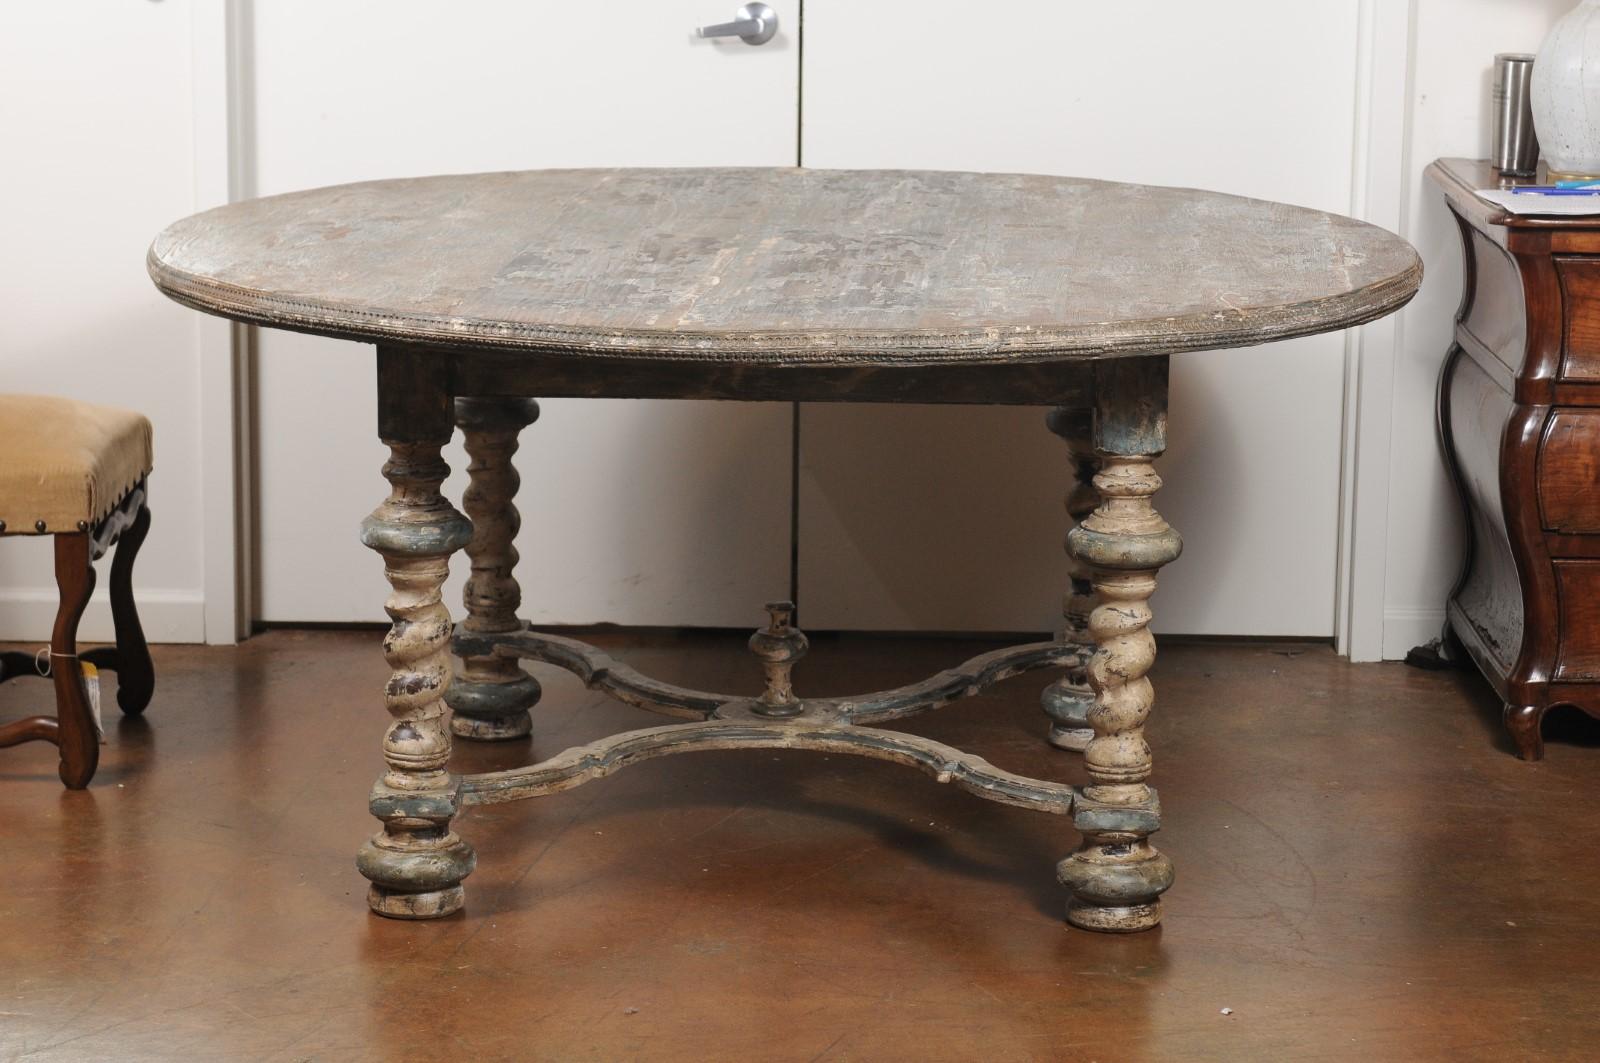 19th Century Italian Baroque Style Dining Room Table with Barley Twist Legs and Stretcher